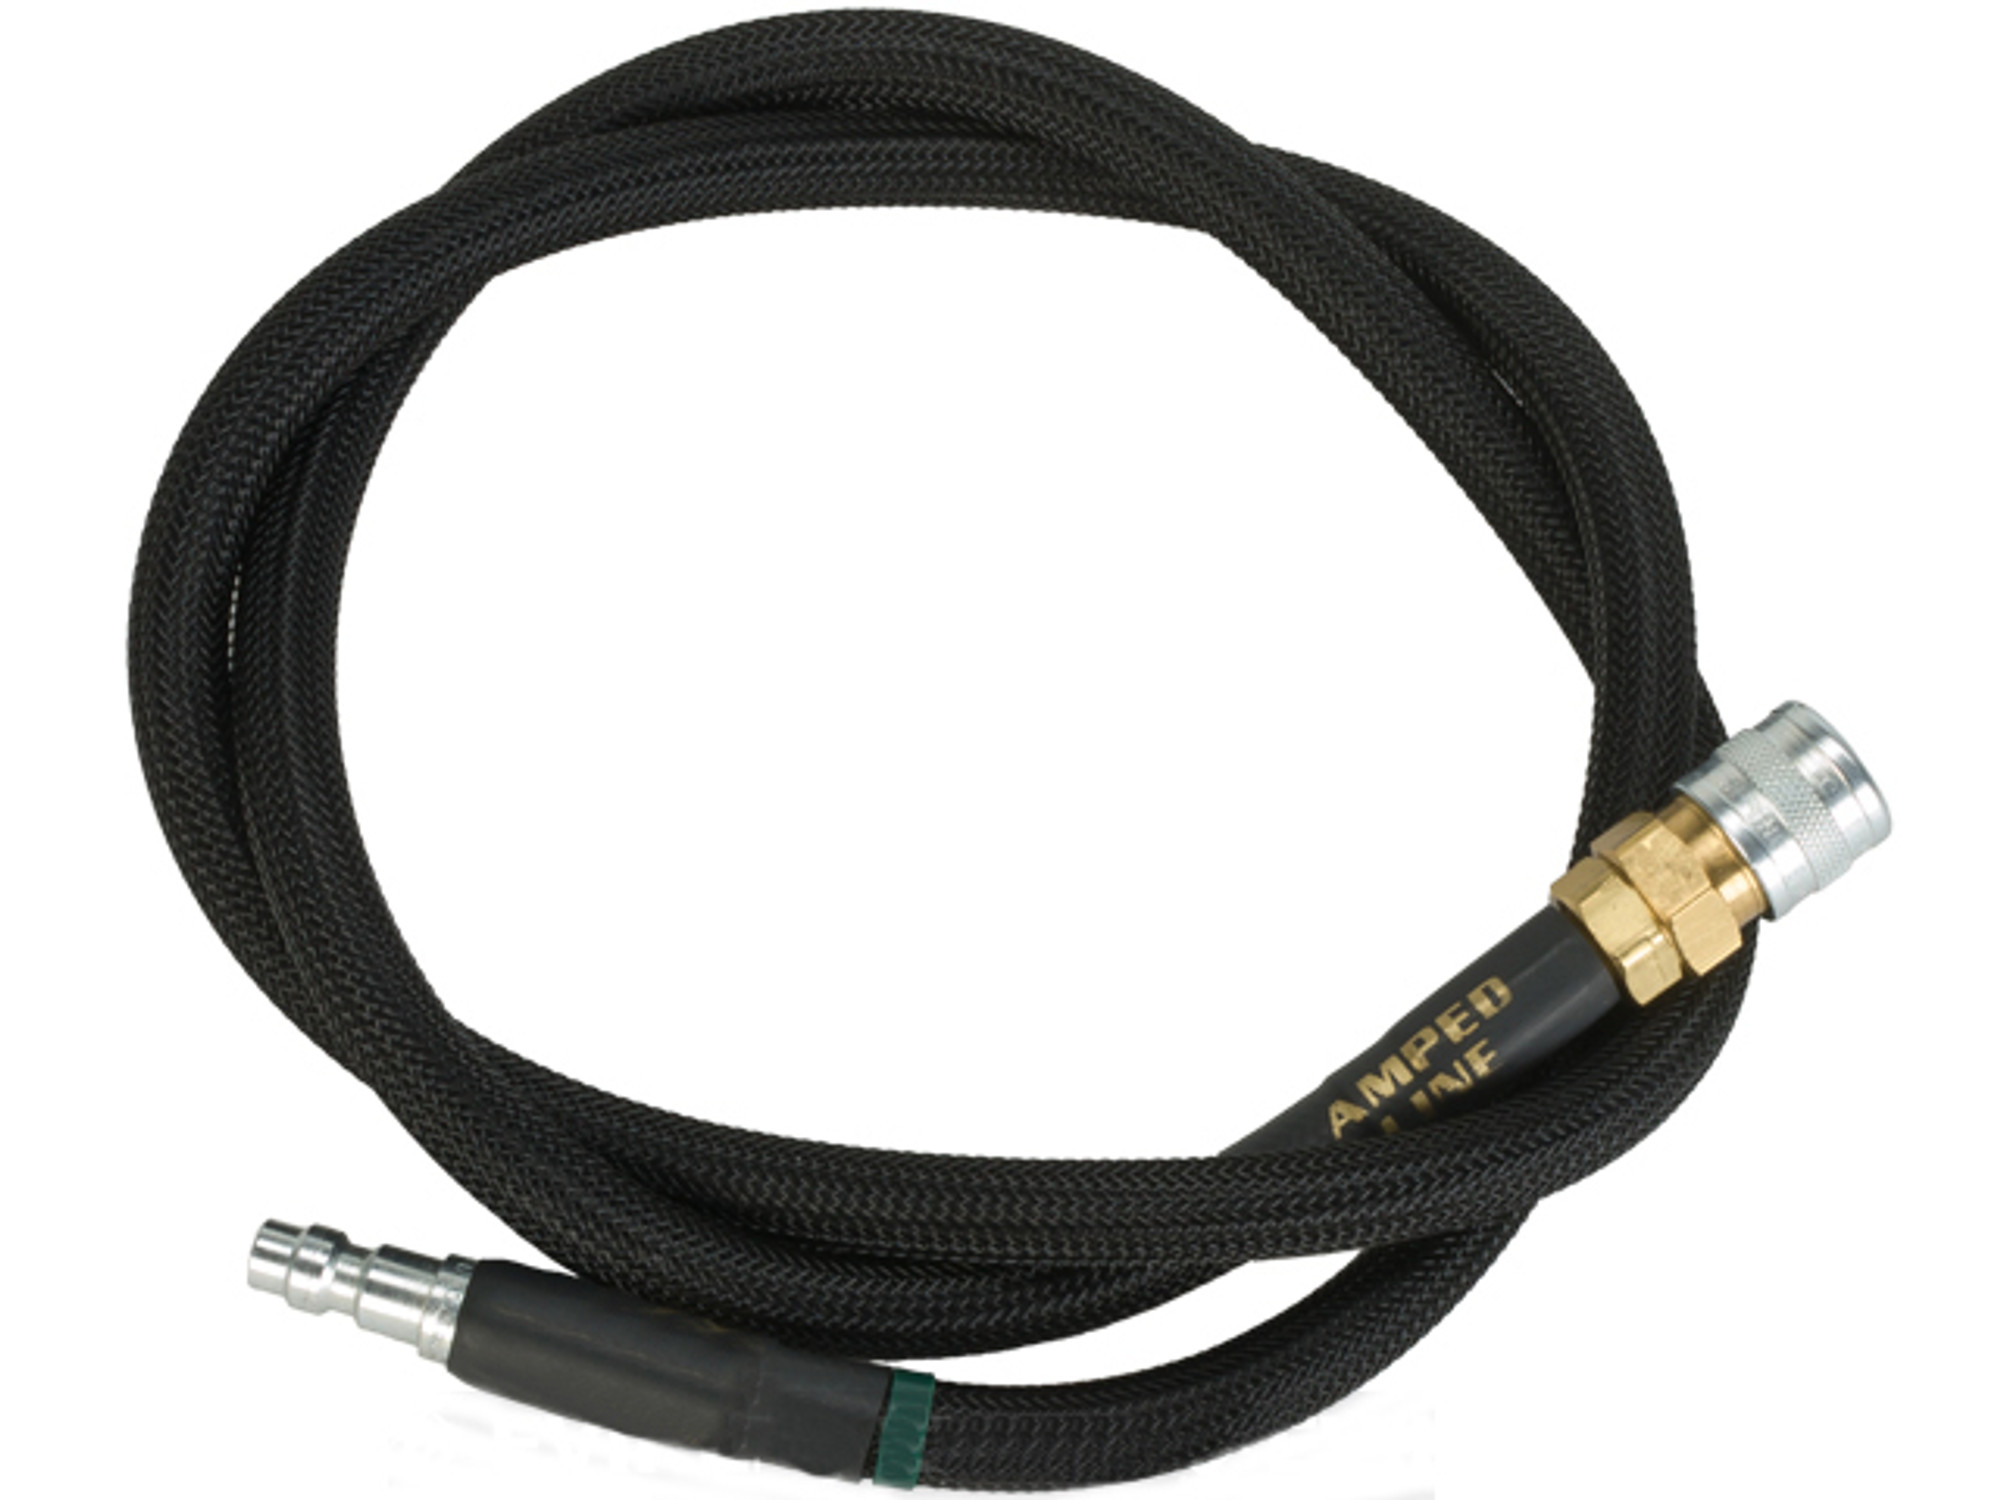 Amped Airsoft 36in. Standard Braided Hose for HPA Systems with Quick Detach Fittings - Black